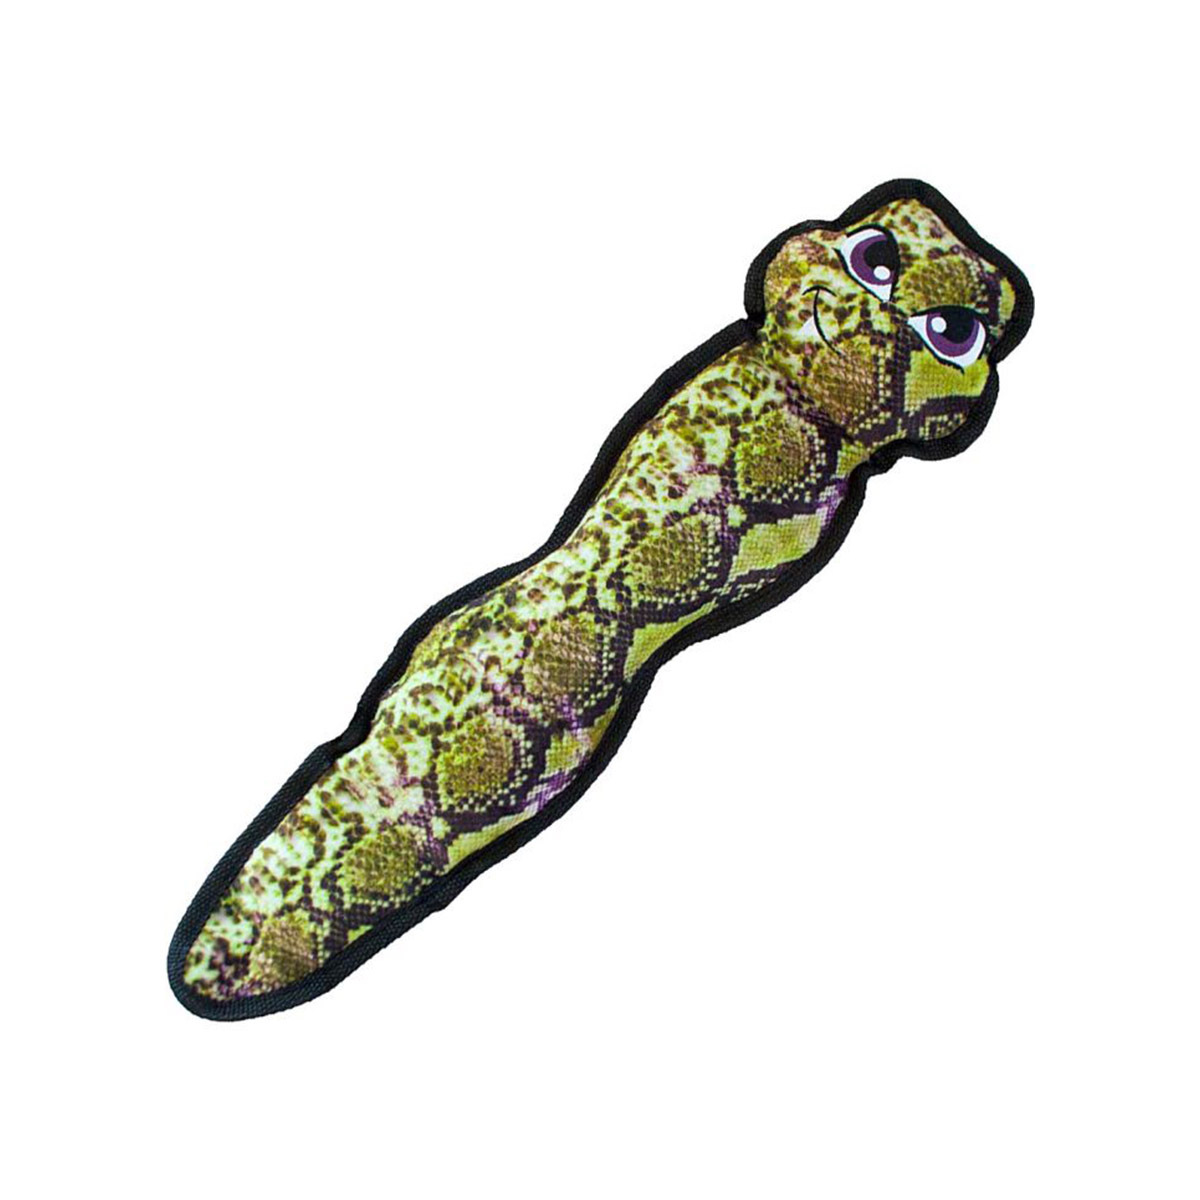 Outward Hound Invincible Tough Skinz Rattle Snake Dog Toy - Green - Large image 1